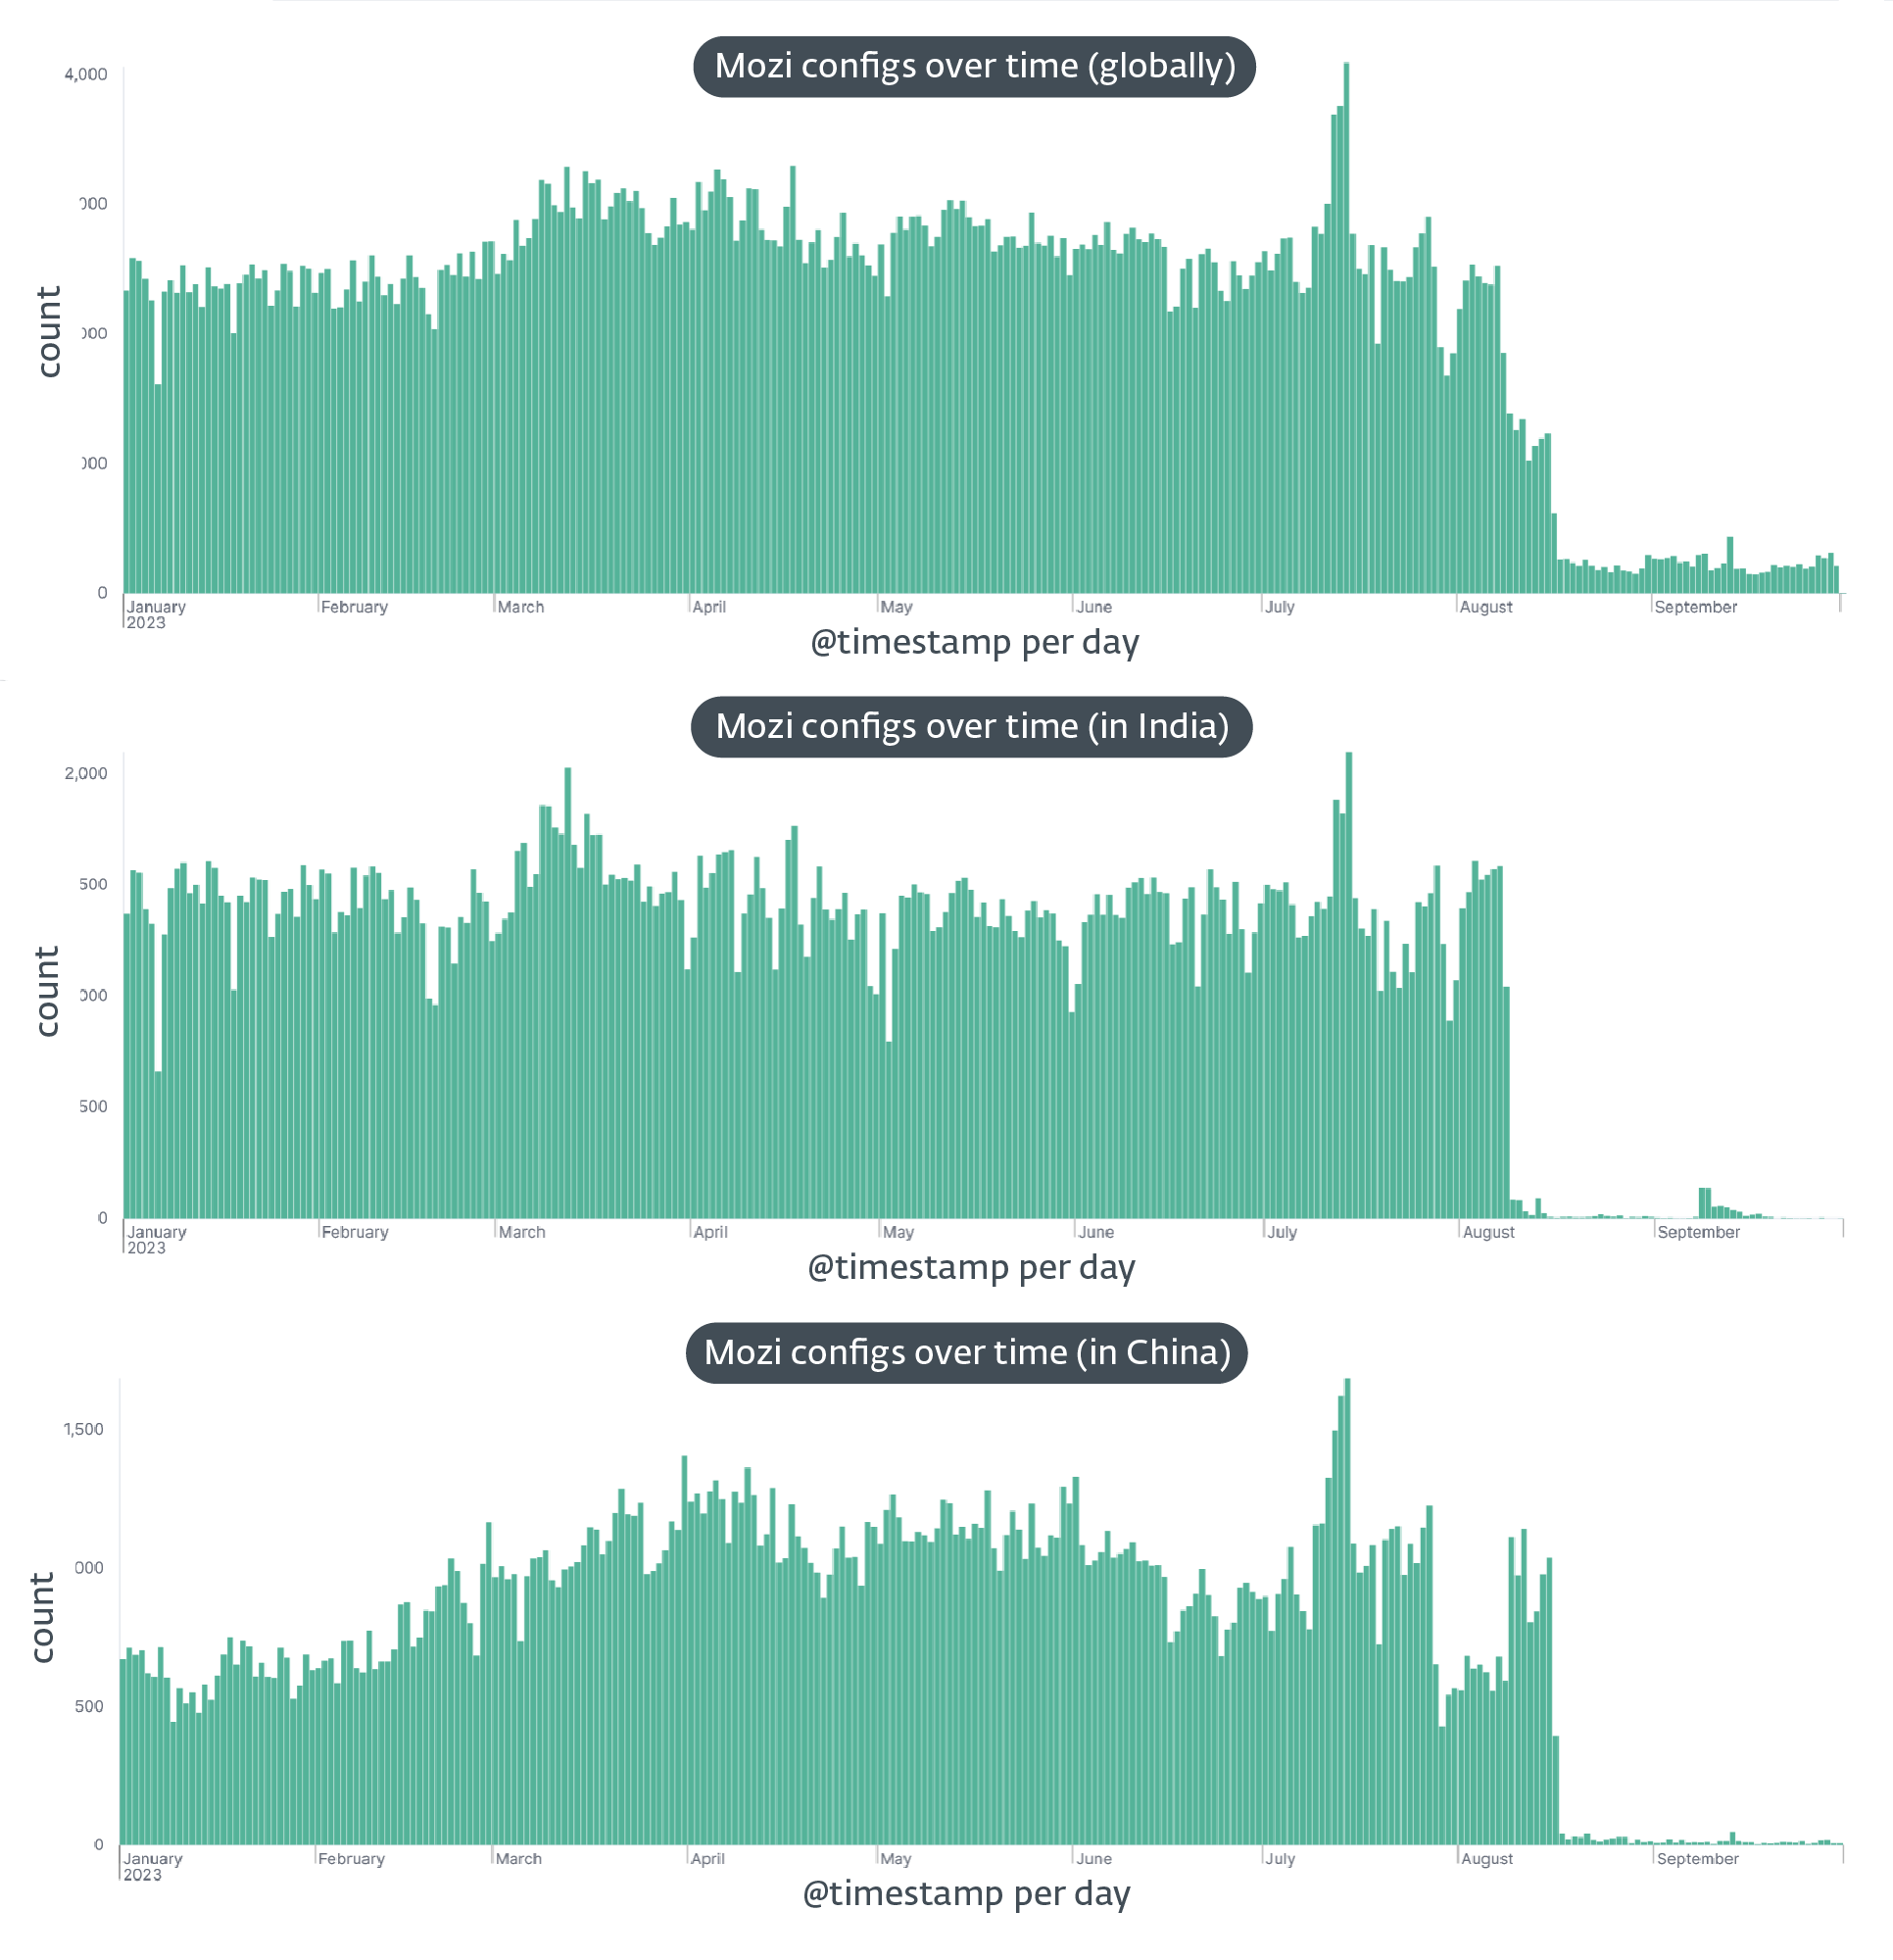 Figure 1 Sudden drop in Mozi activity globally (top), in India (middle), and in China (bottom)